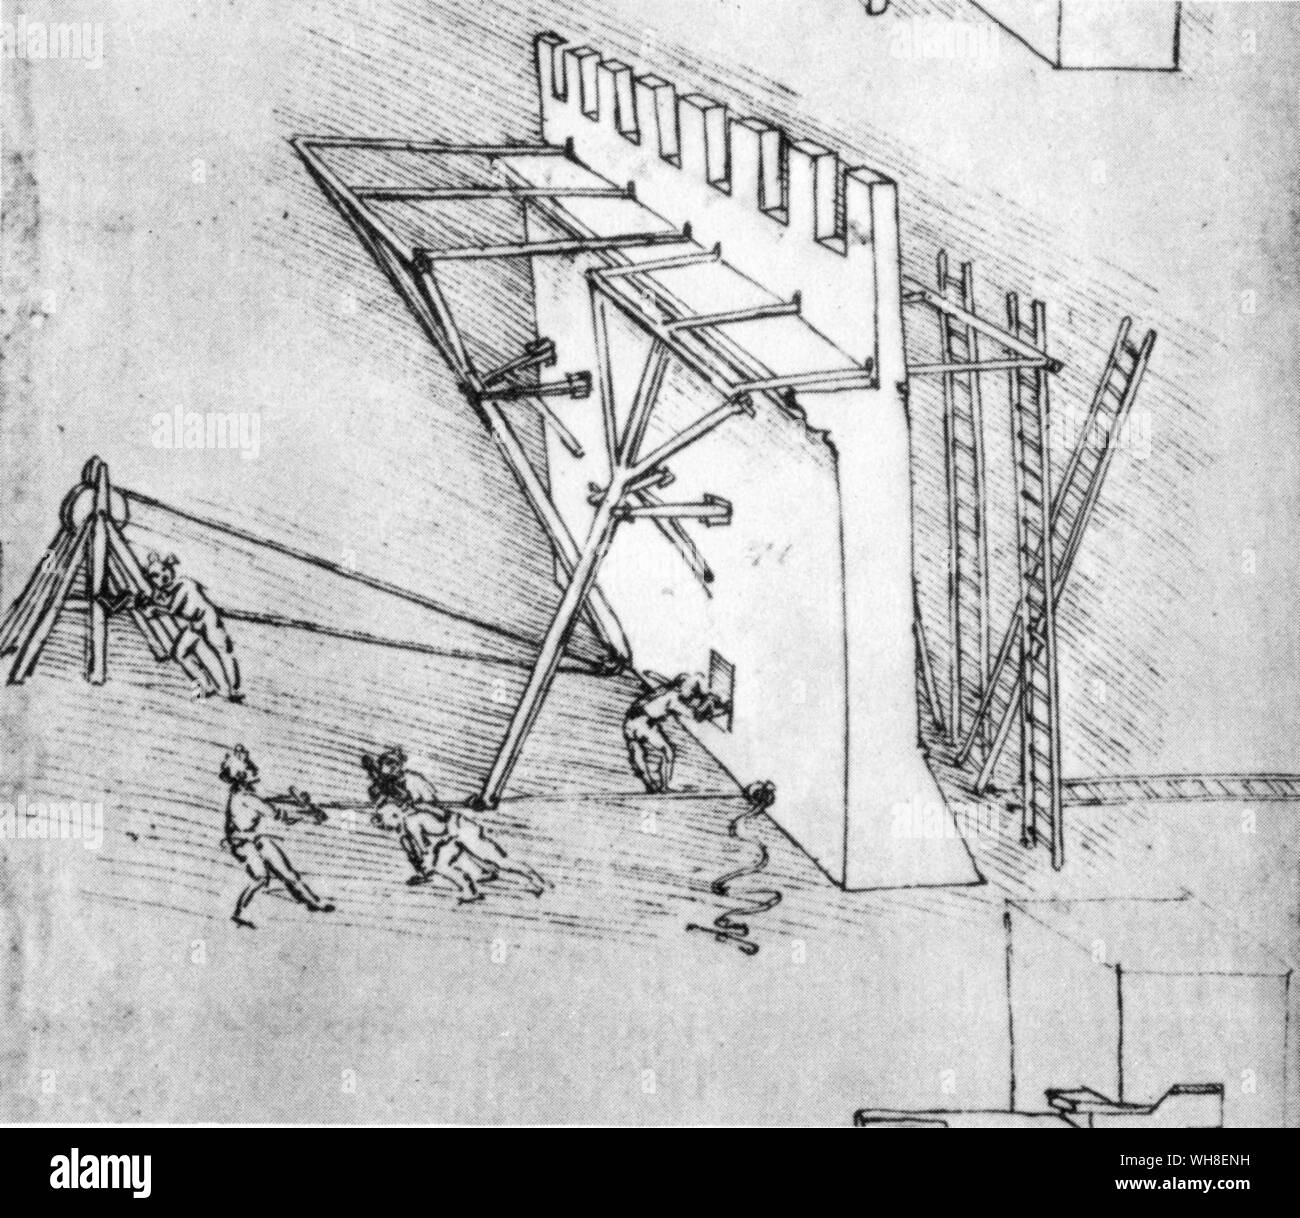 A device operated by a system of levers to overturn the ladders of would-be invaders, from Leonardo's repertoire of military machines. Leonardo da Vinci (1452-1519) was an Italian Renaissance architect, musician, anatomist, inventor, engineer, sculptor, geometer and artist. . . Stock Photo